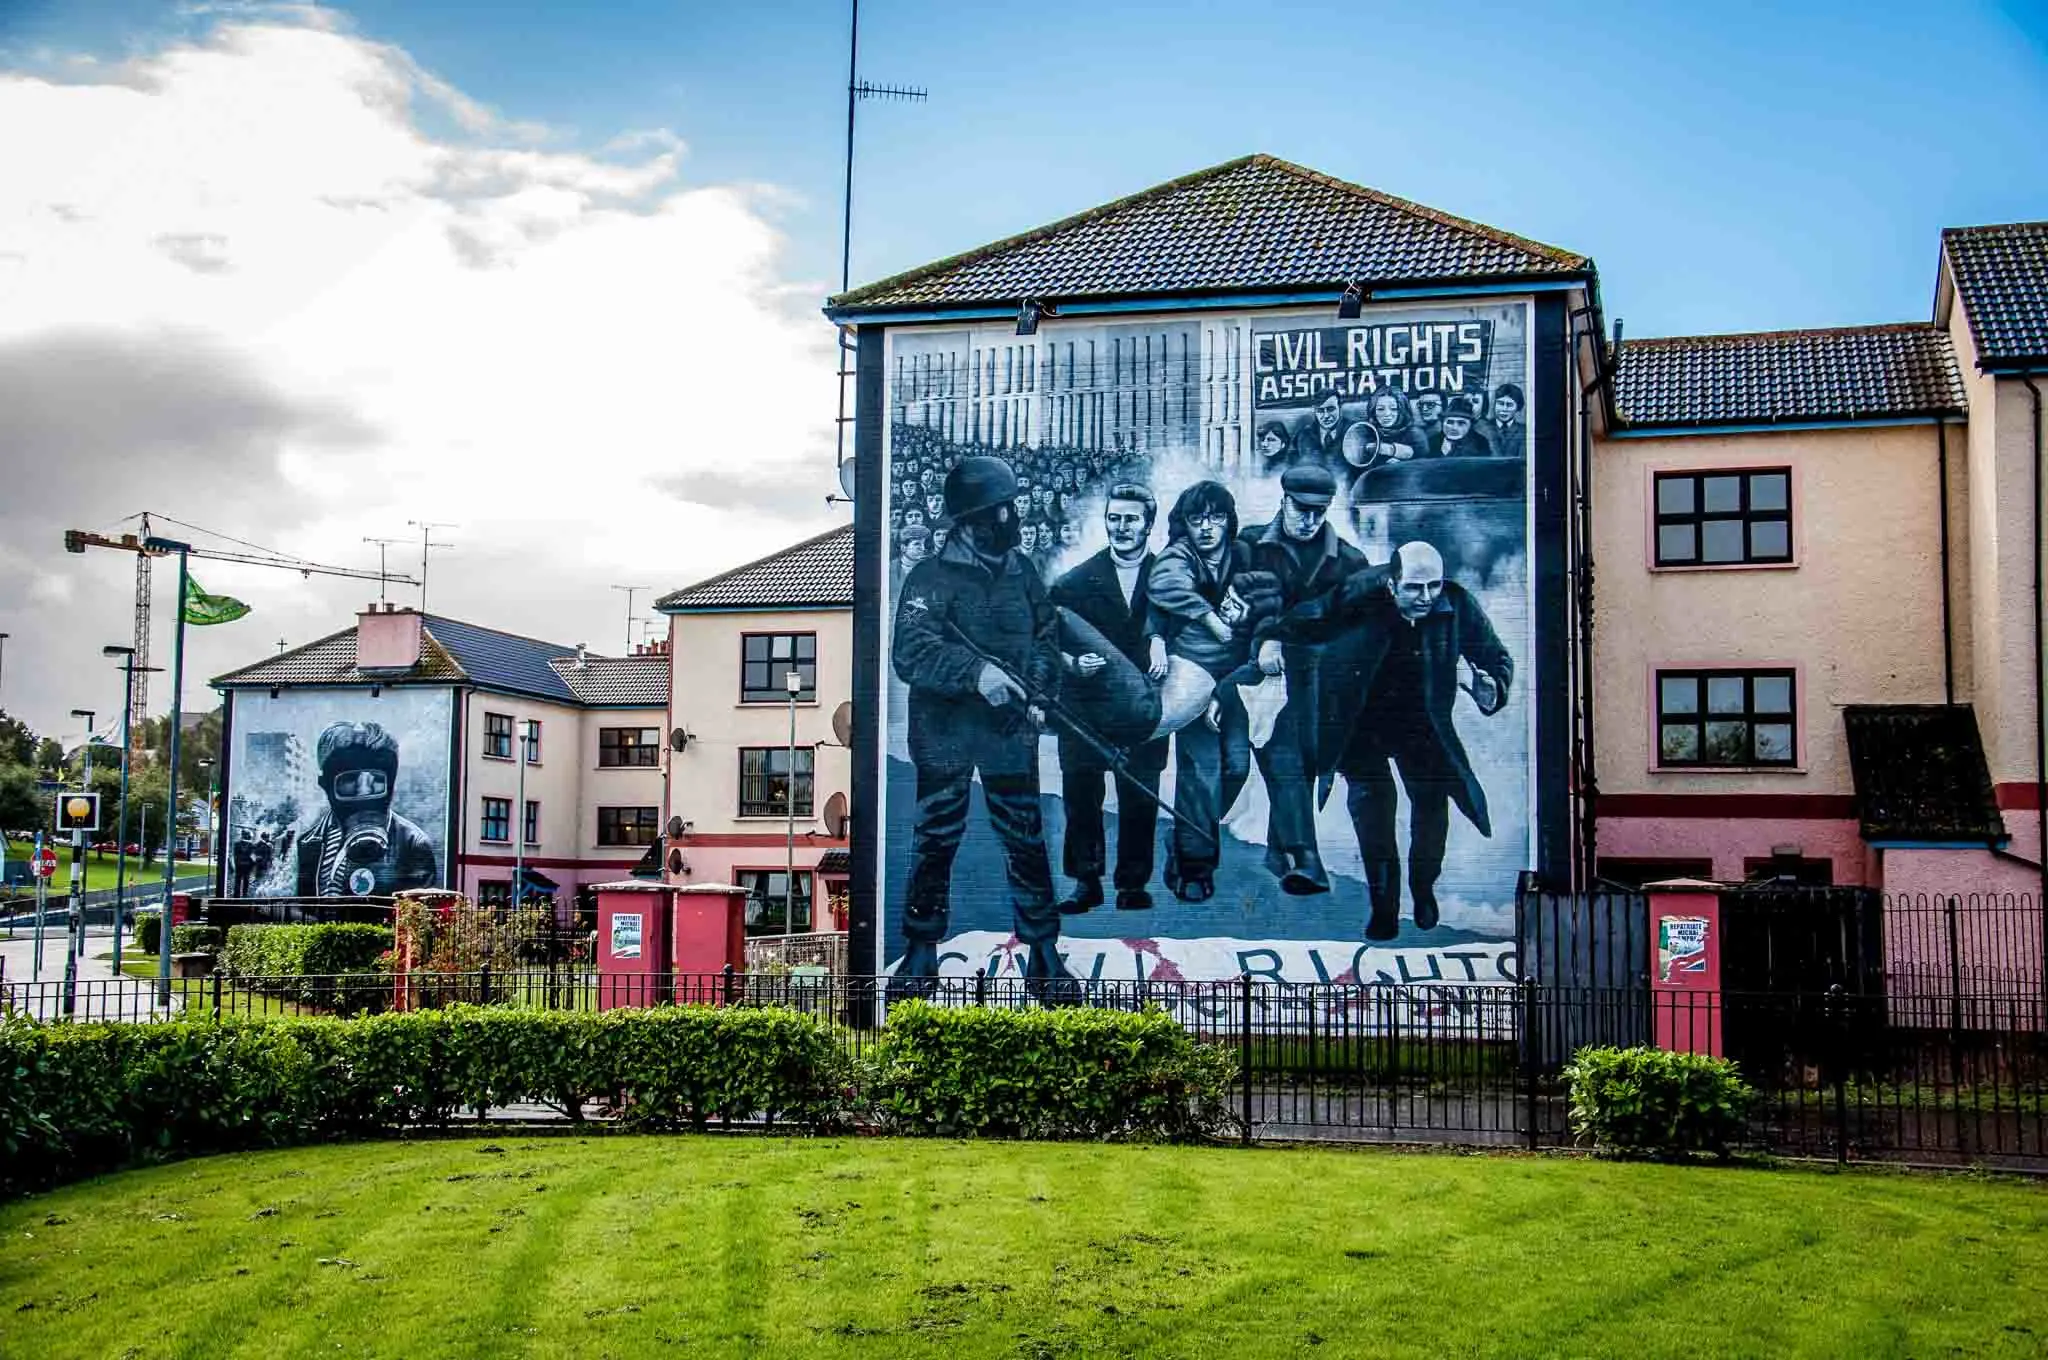 One of the Bogside Derry murals commemorating the events of Bloody Sunday